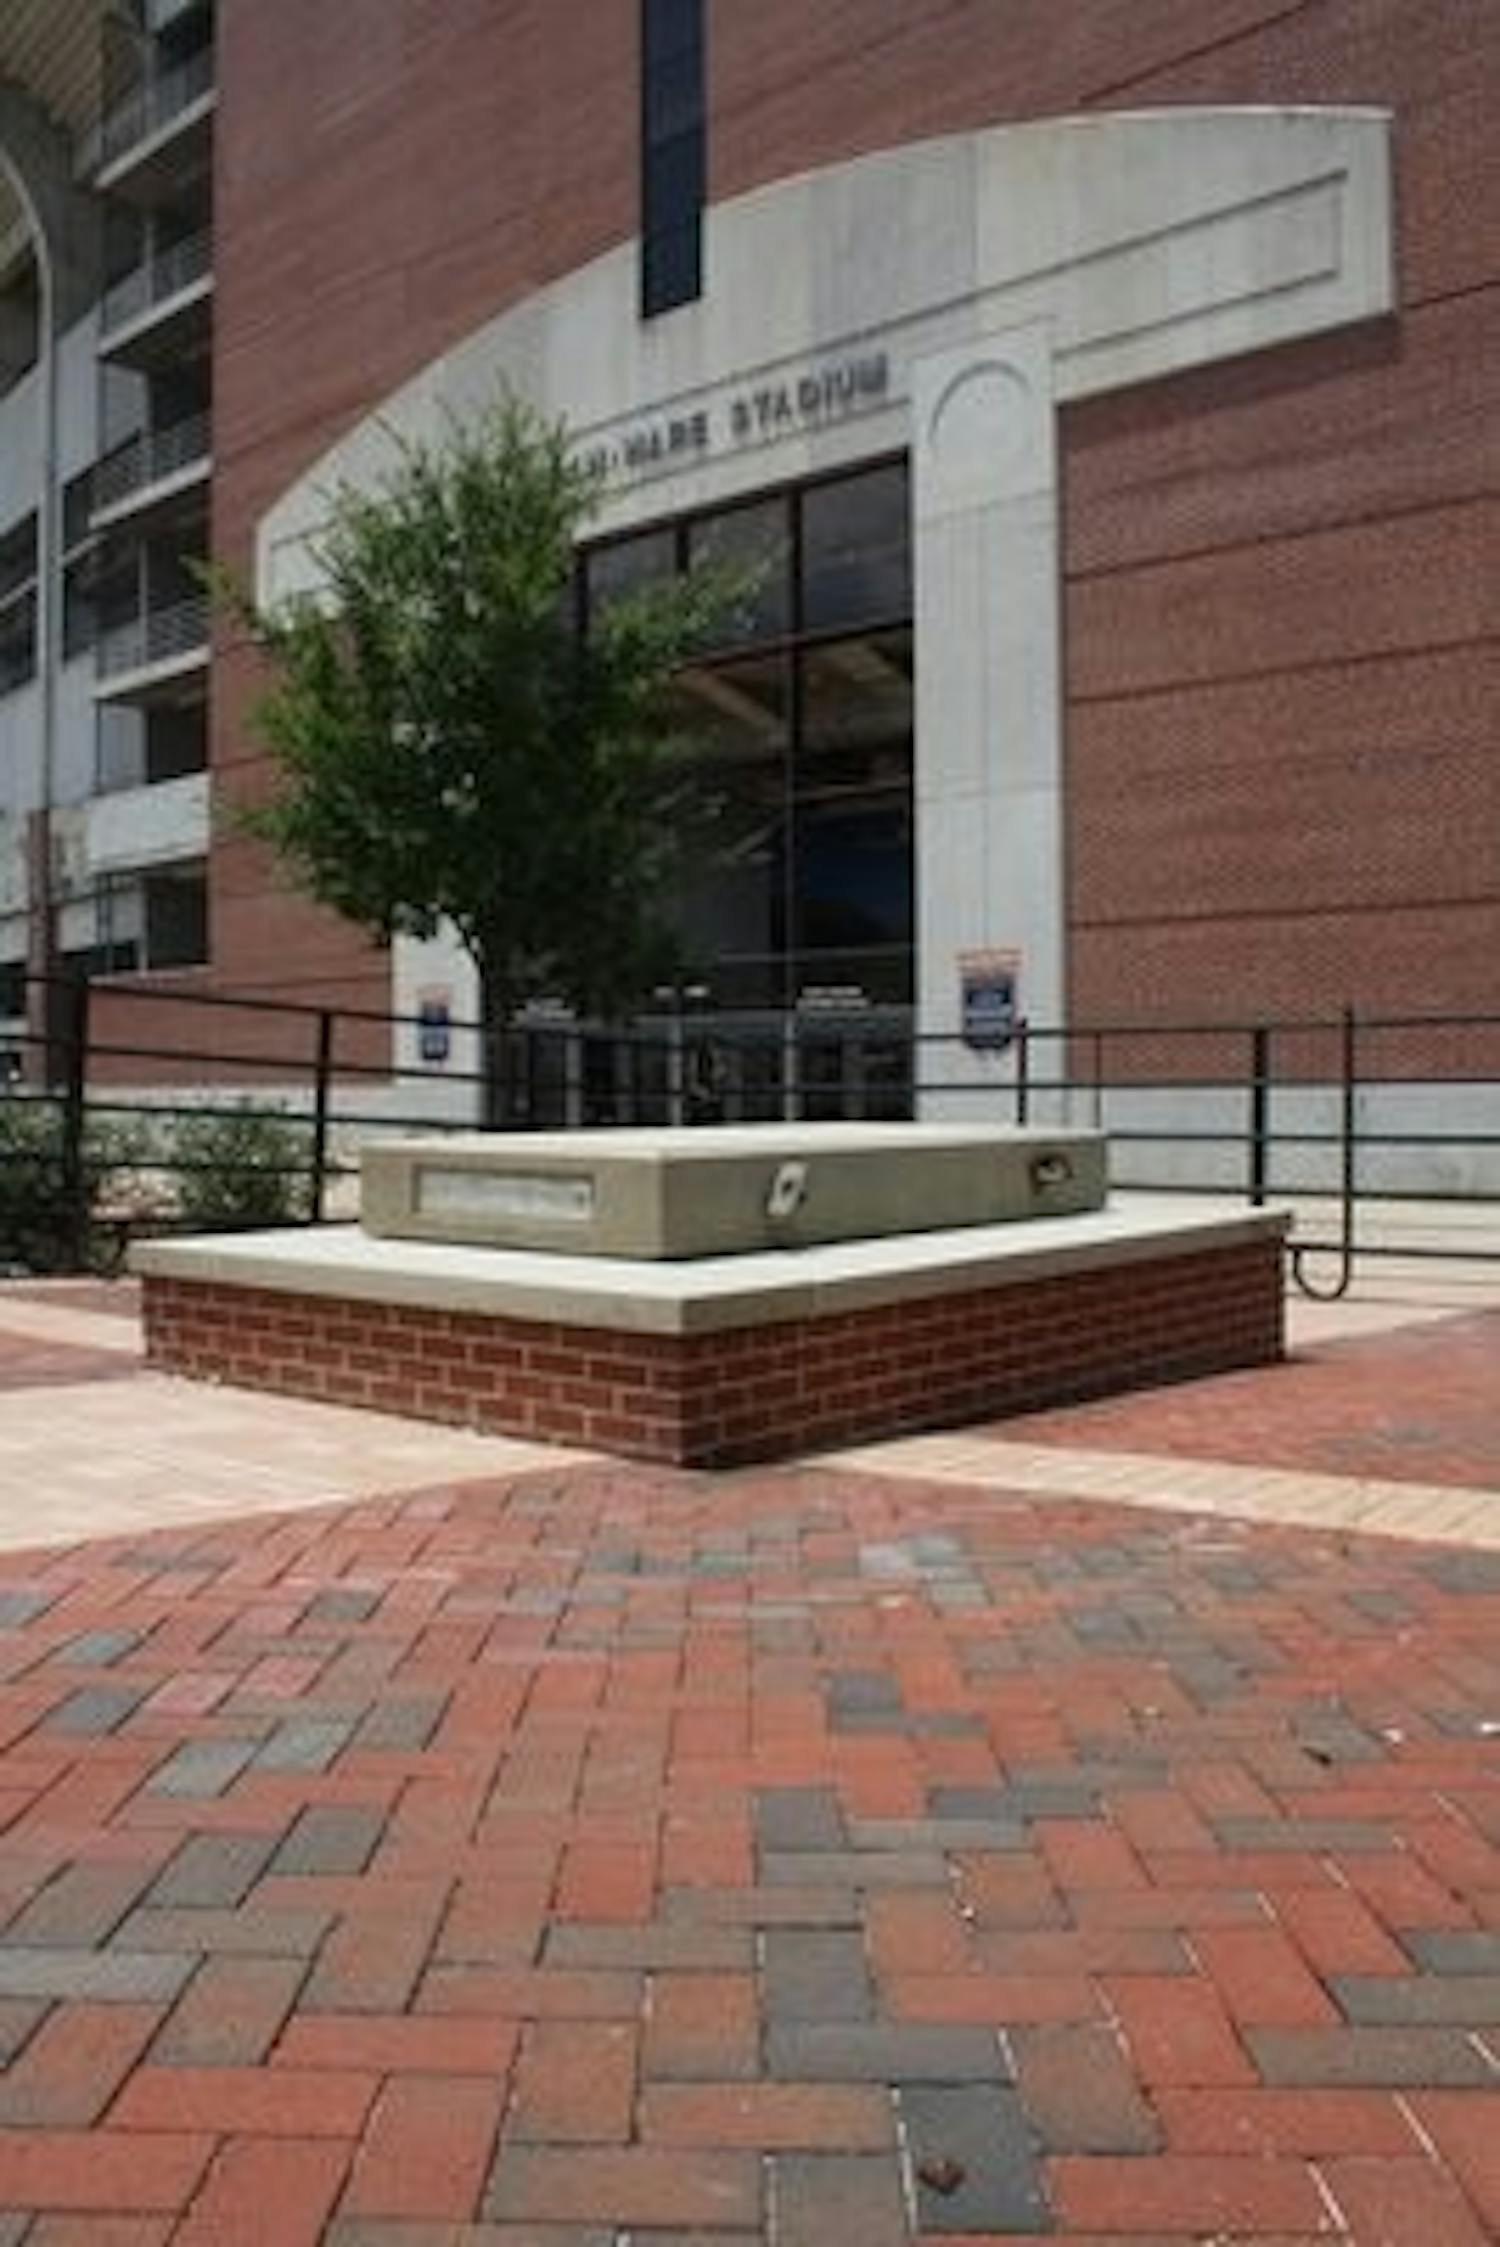 Empty pedastals facing the Student Center appear to be a possible place to put the statues, but the placement of the statues has not been announced yet. (Nicole Singleton / Sports Editor)